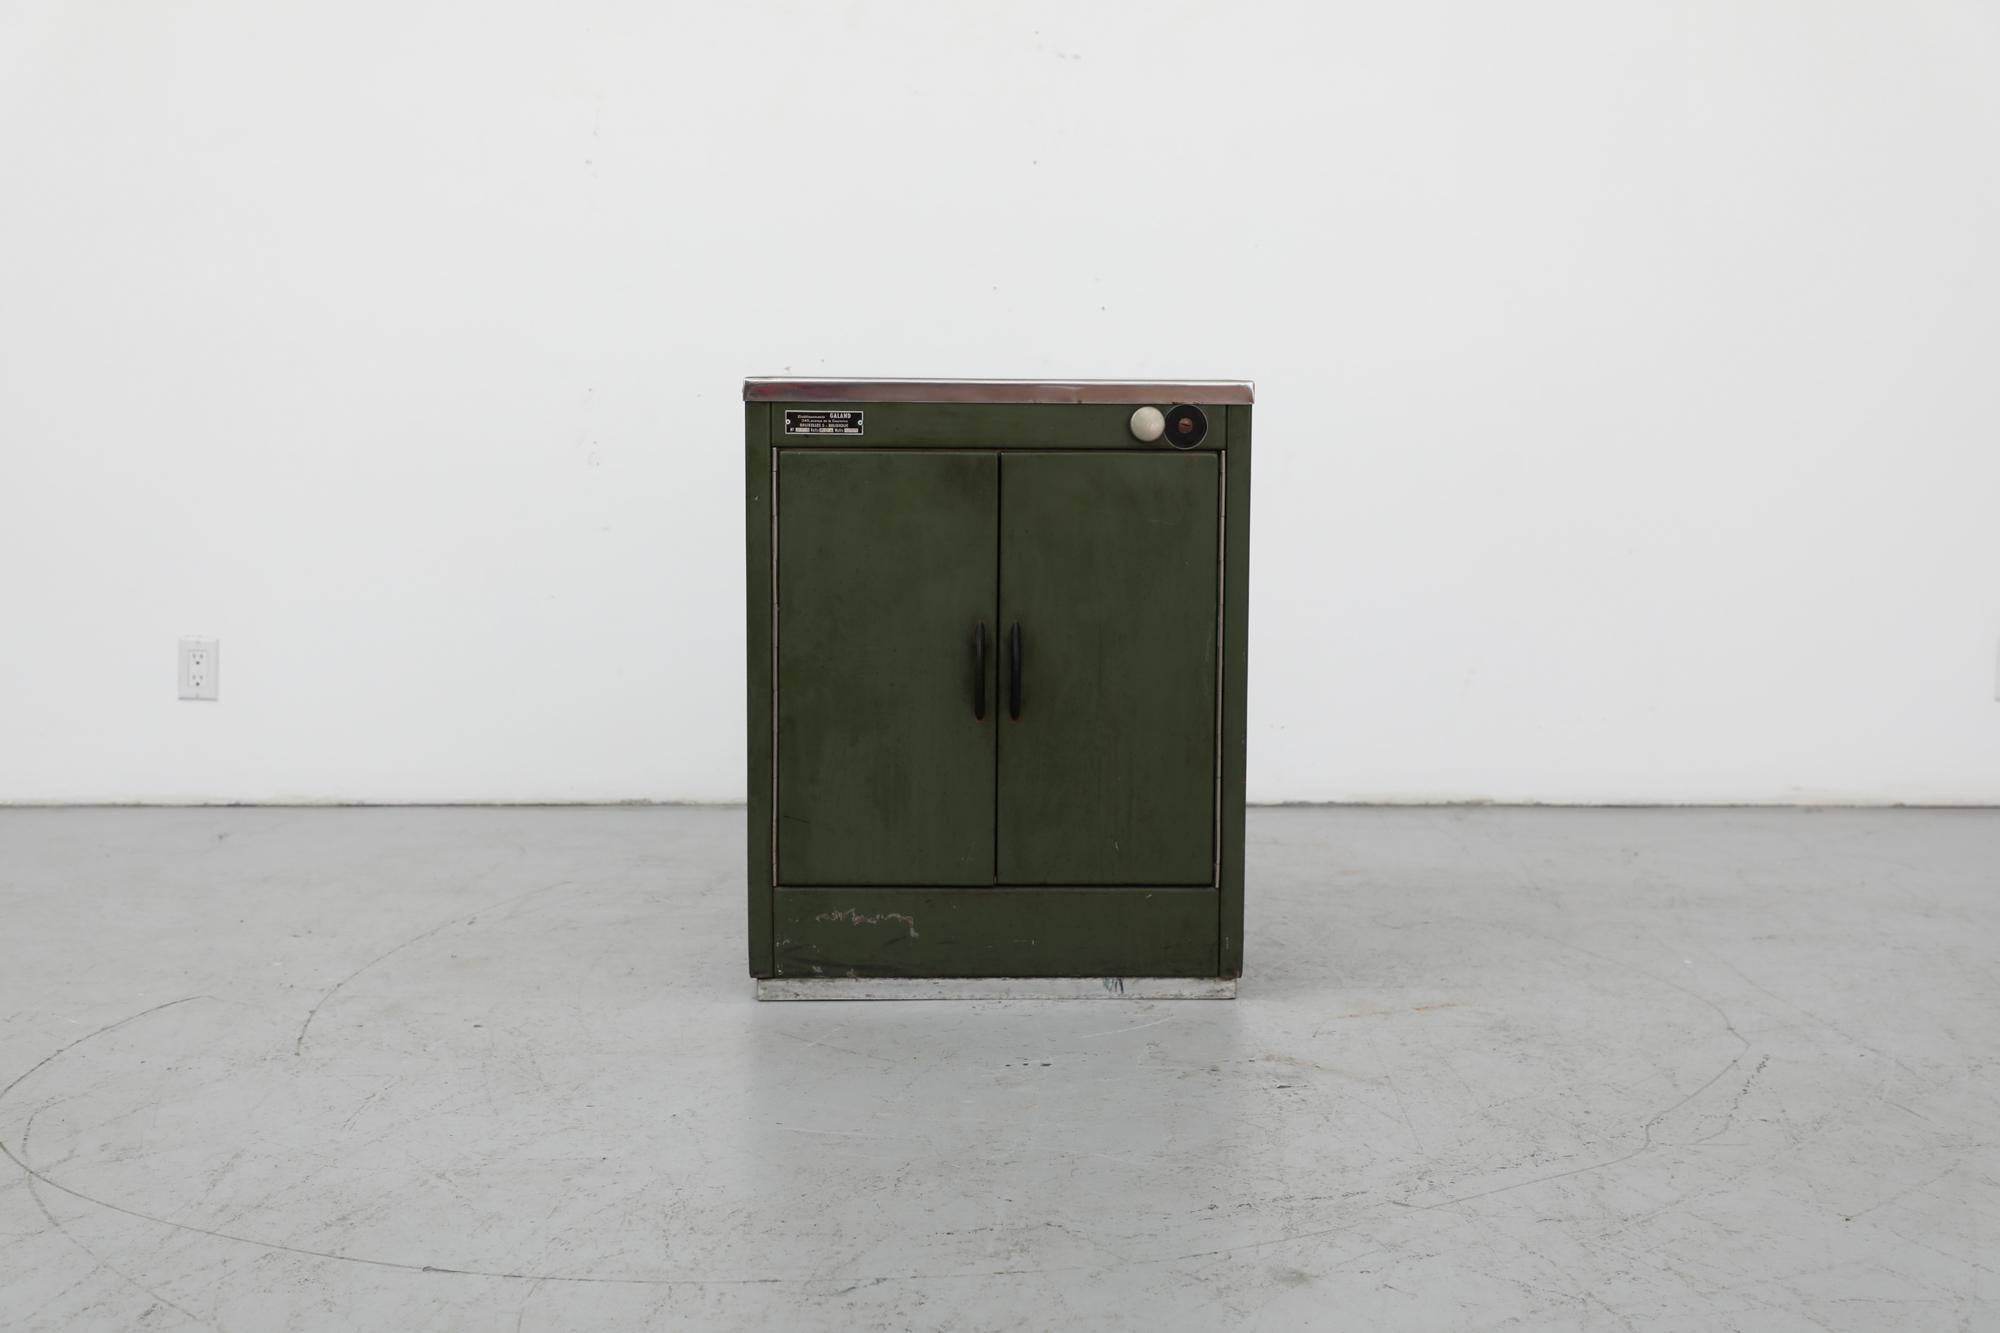 Belgian dark green enameled metal utility cabinet with bake-lite handles and teak shelf added. In otherwise original condition with visible wear, including scratches. Great little entry cabinet. Wear is consistent with its age and use.